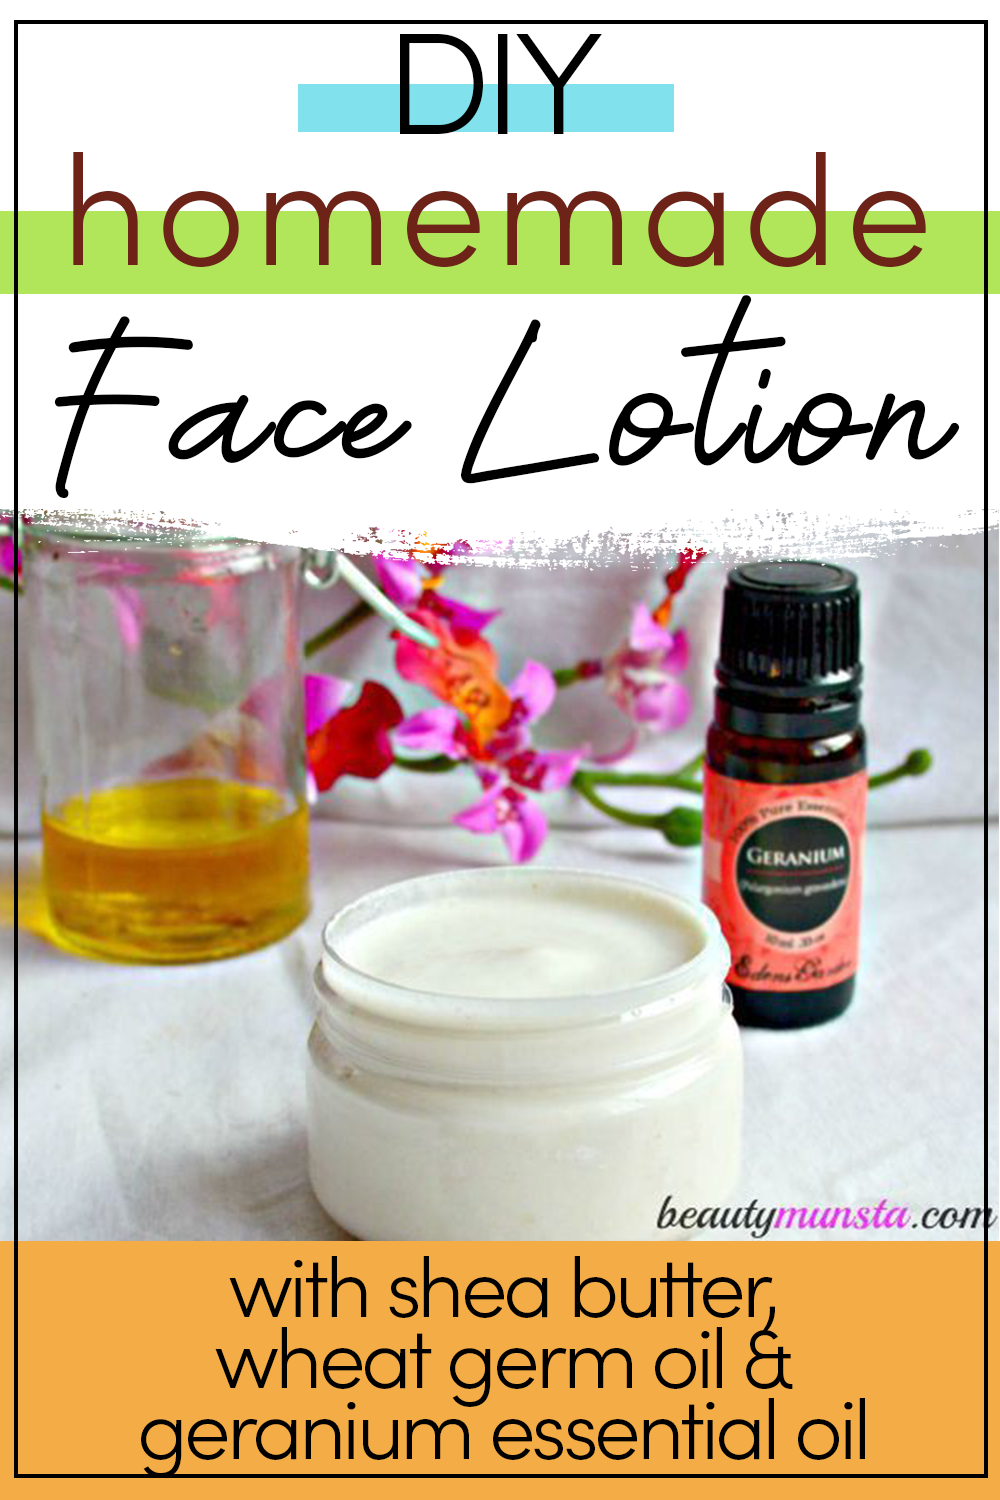 Homemade Shea Butter Lotion Recipe with Geranium Essential Oil -  beautymunsta - free natural beauty hacks and more!